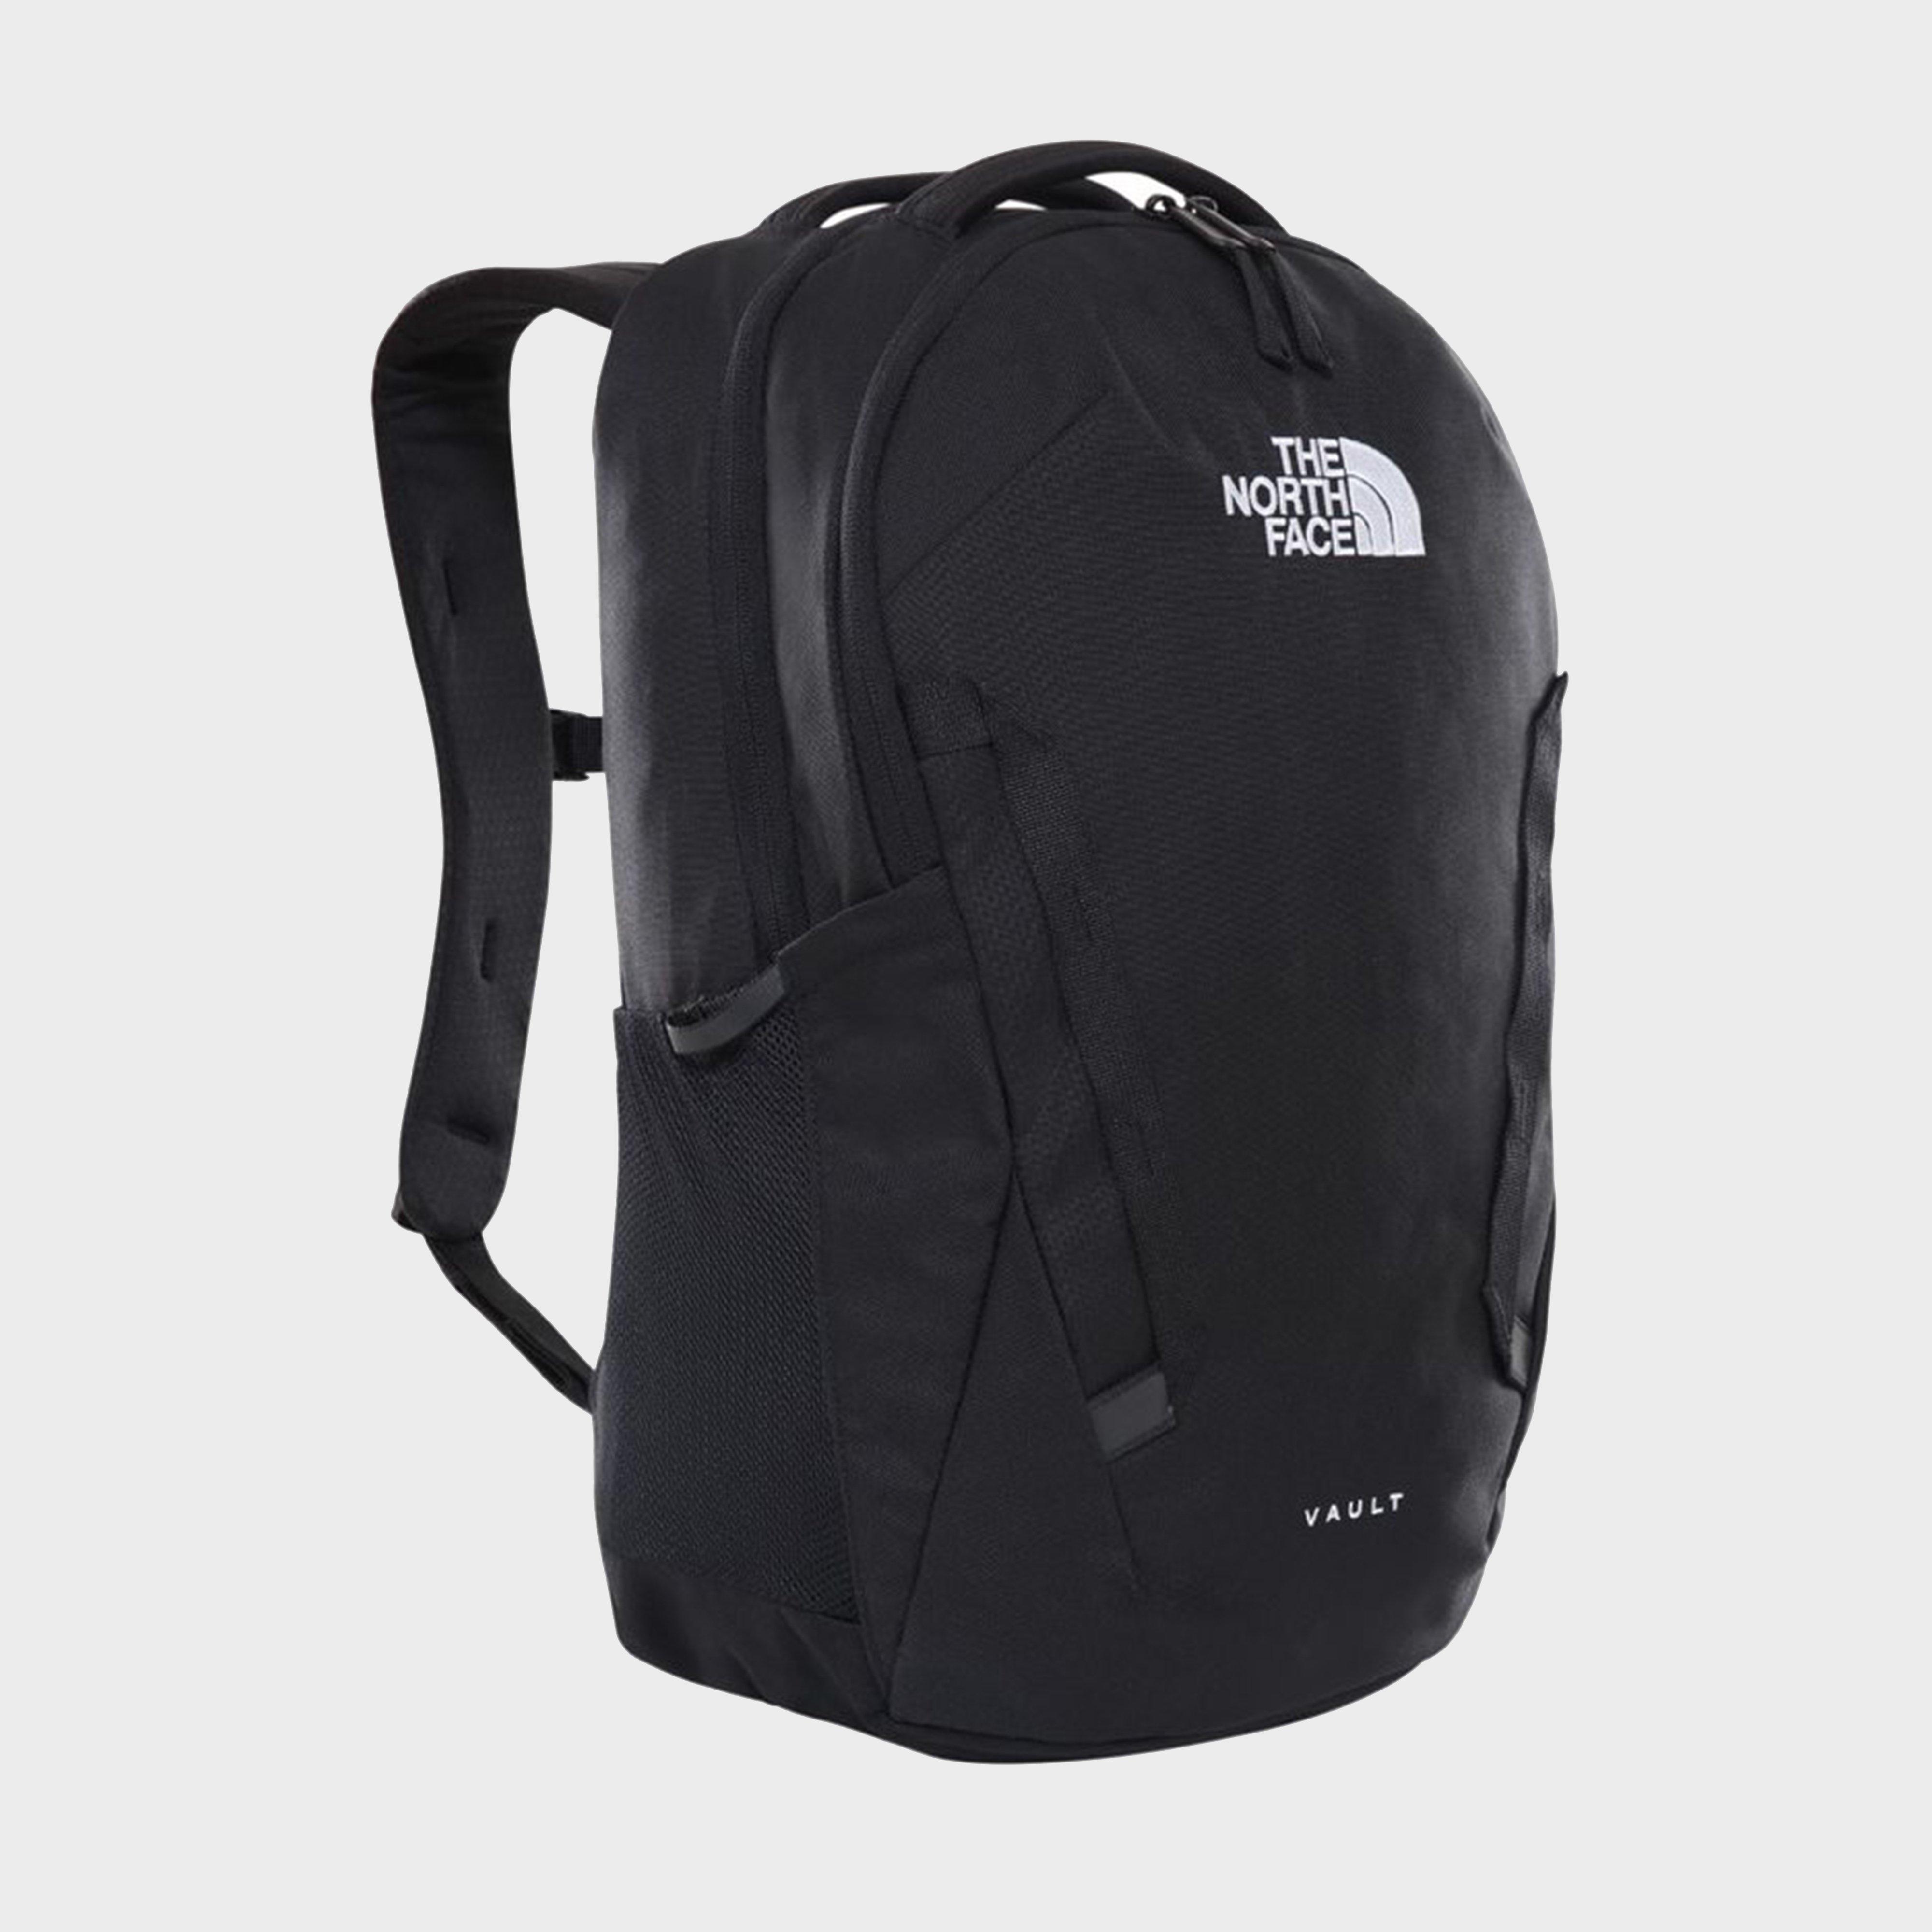 The North Face Vault Backpack | Millets